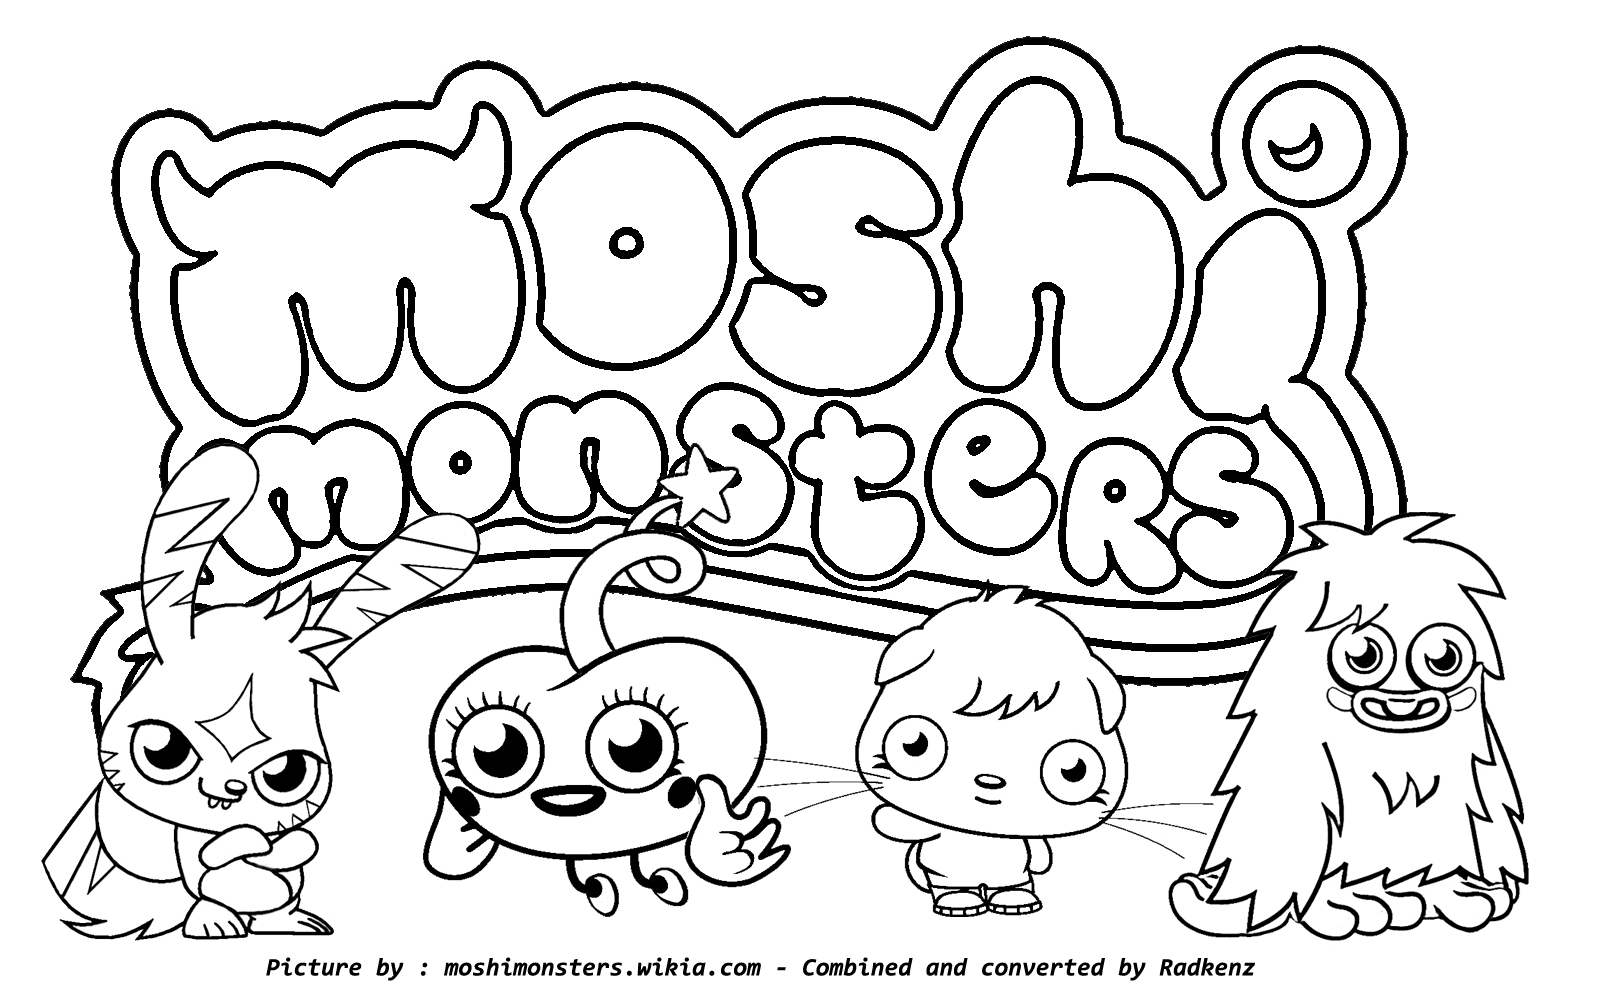 Download Radkenz Artworks Gallery: Moshi monsters coloring page